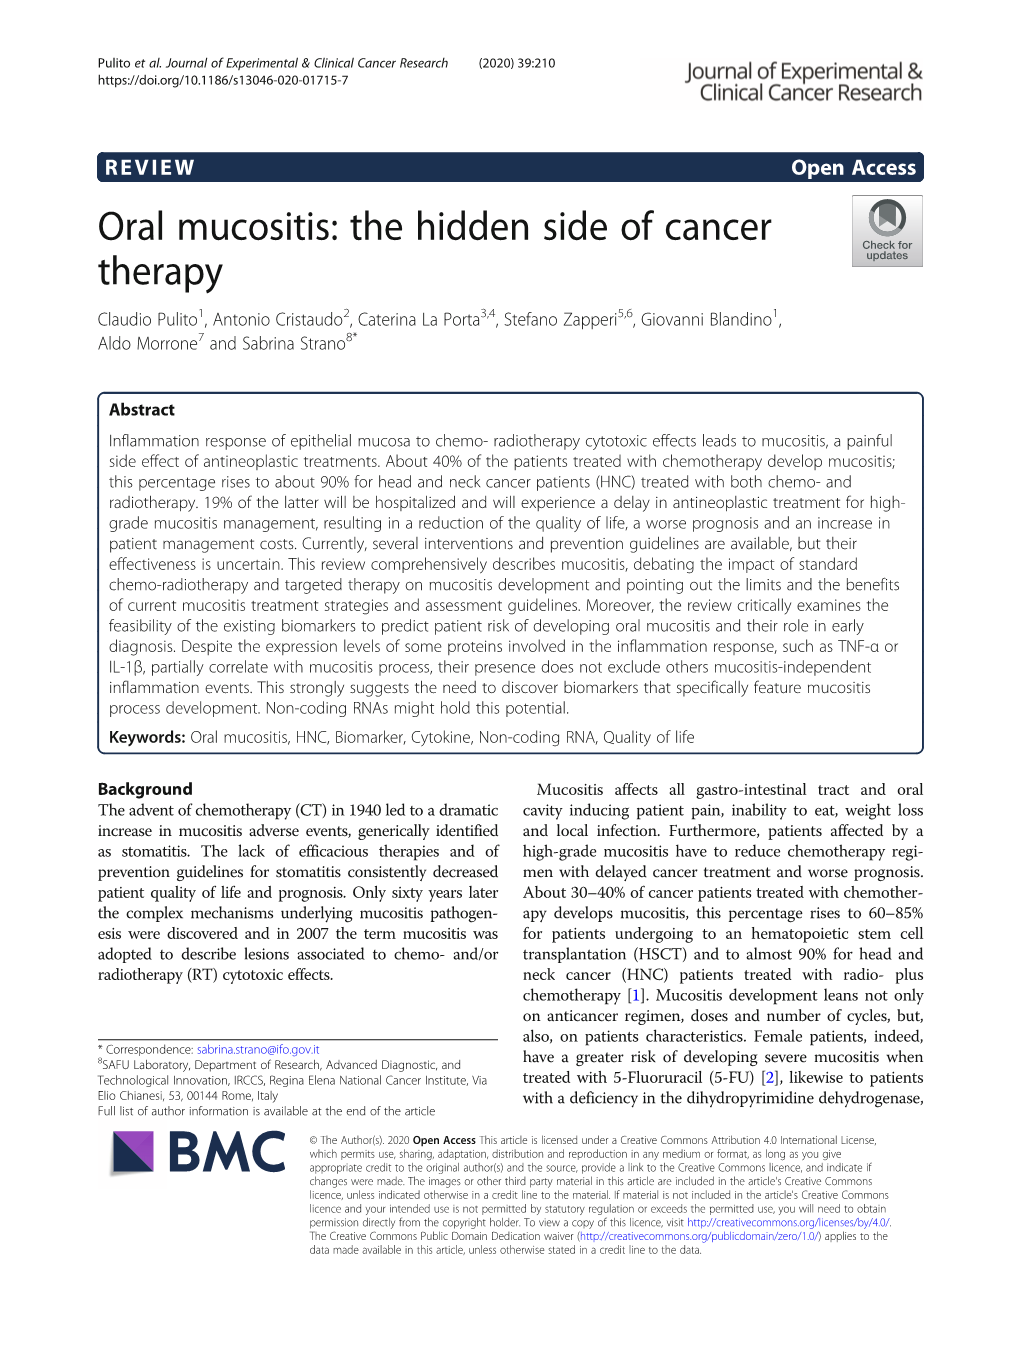 Oral Mucositis: the Hidden Side of Cancer Therapy